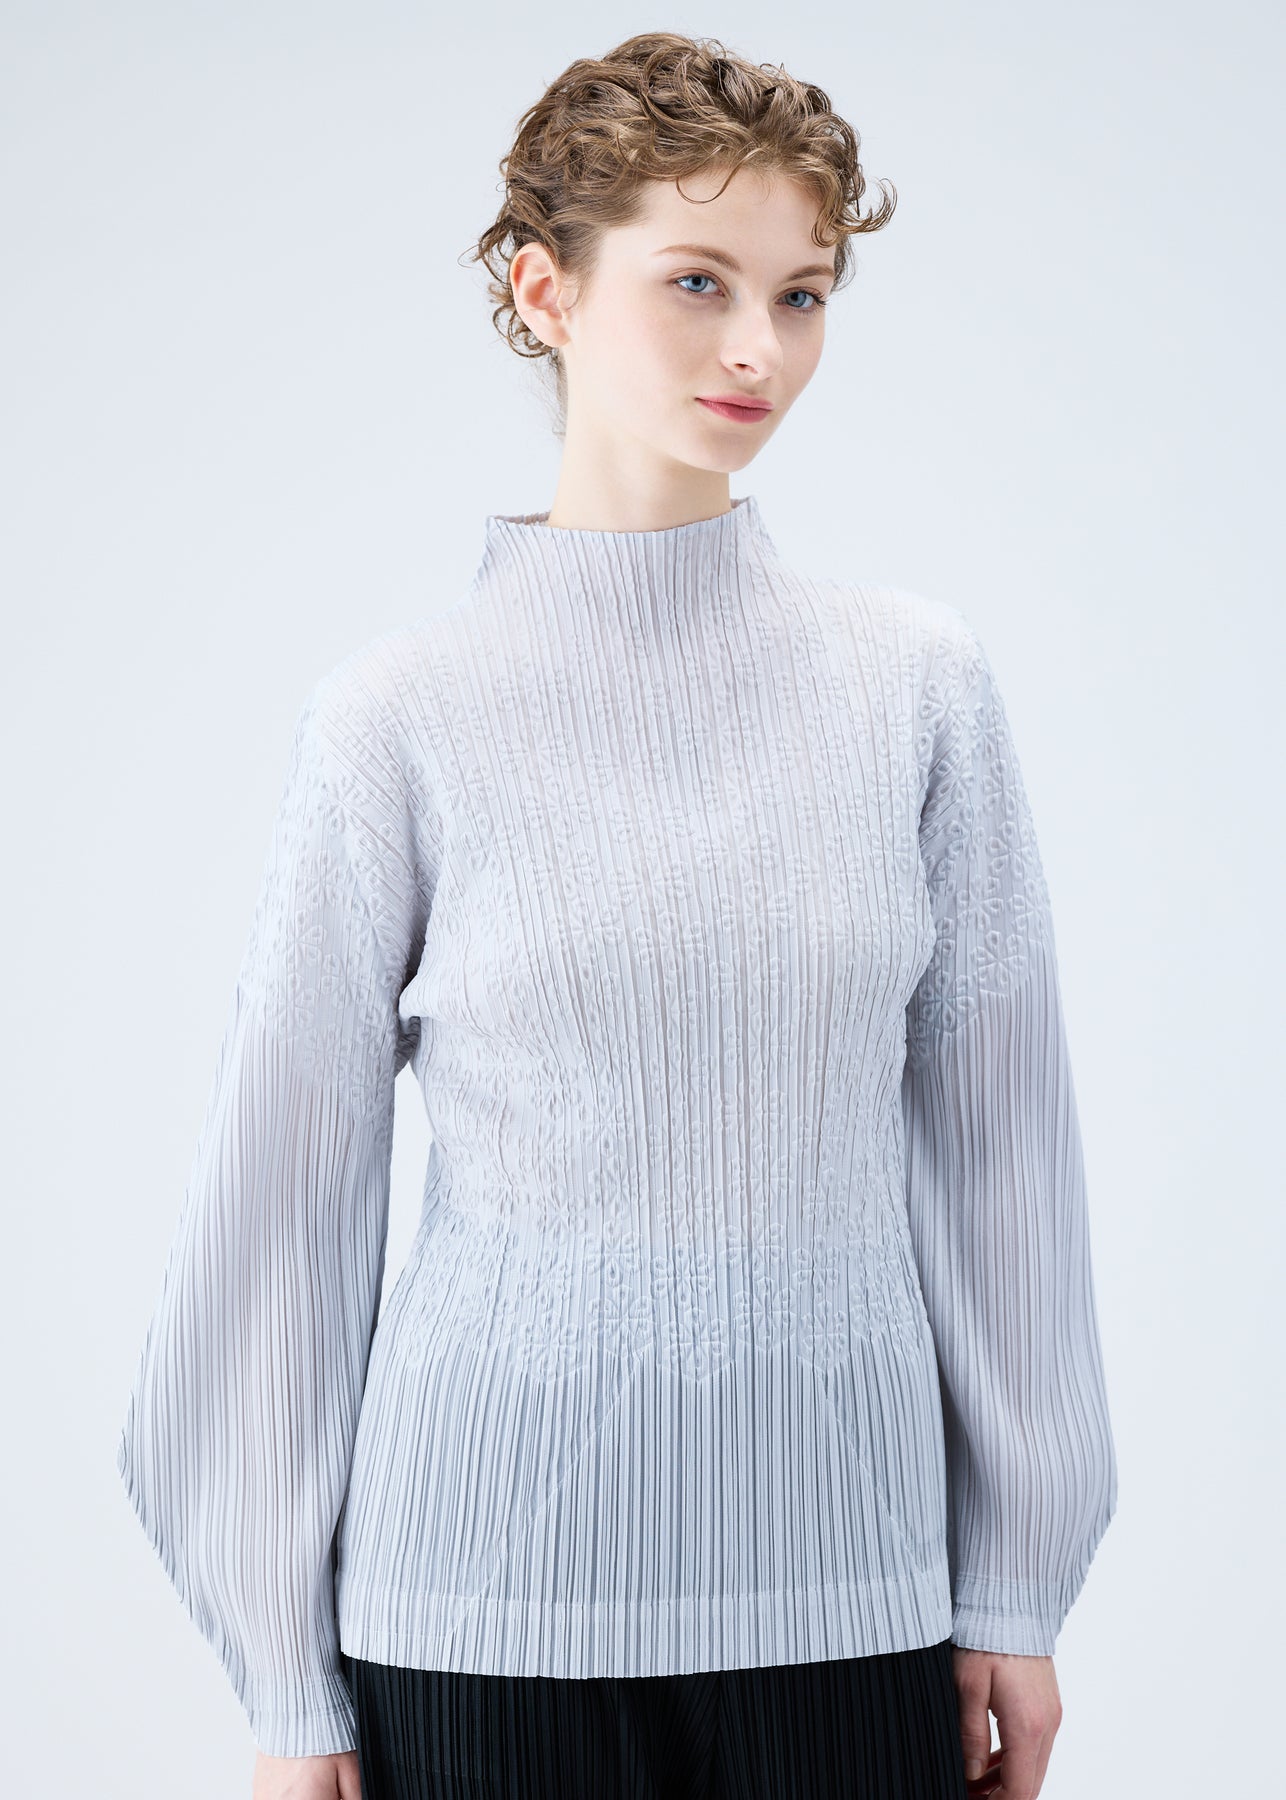 SNOWDROP TOP | The official ISSEY MIYAKE ONLINE STORE | ISSEY